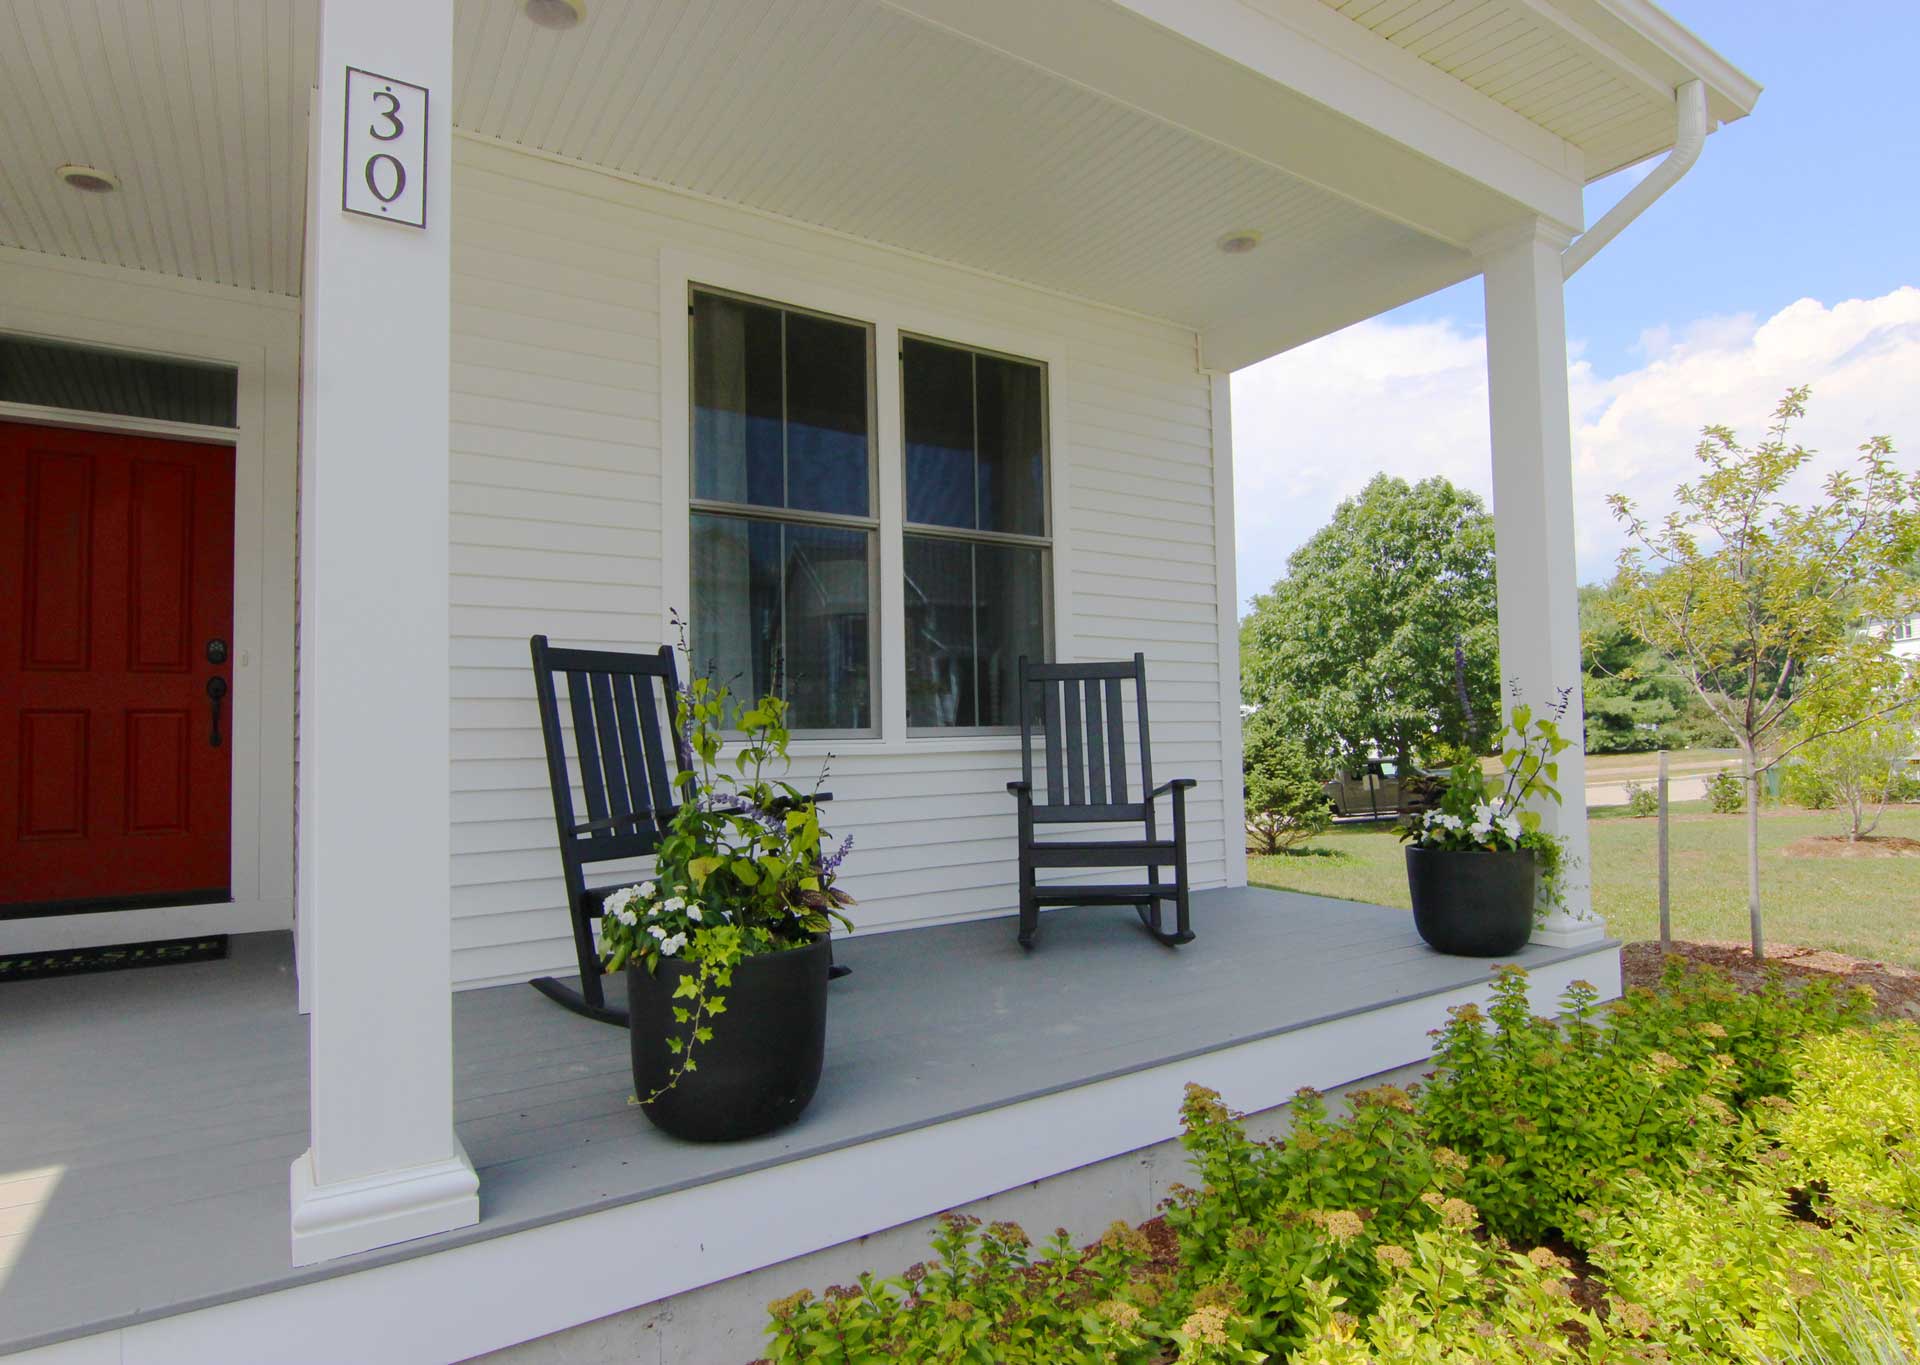 Porch chairs at Hillside Model Home